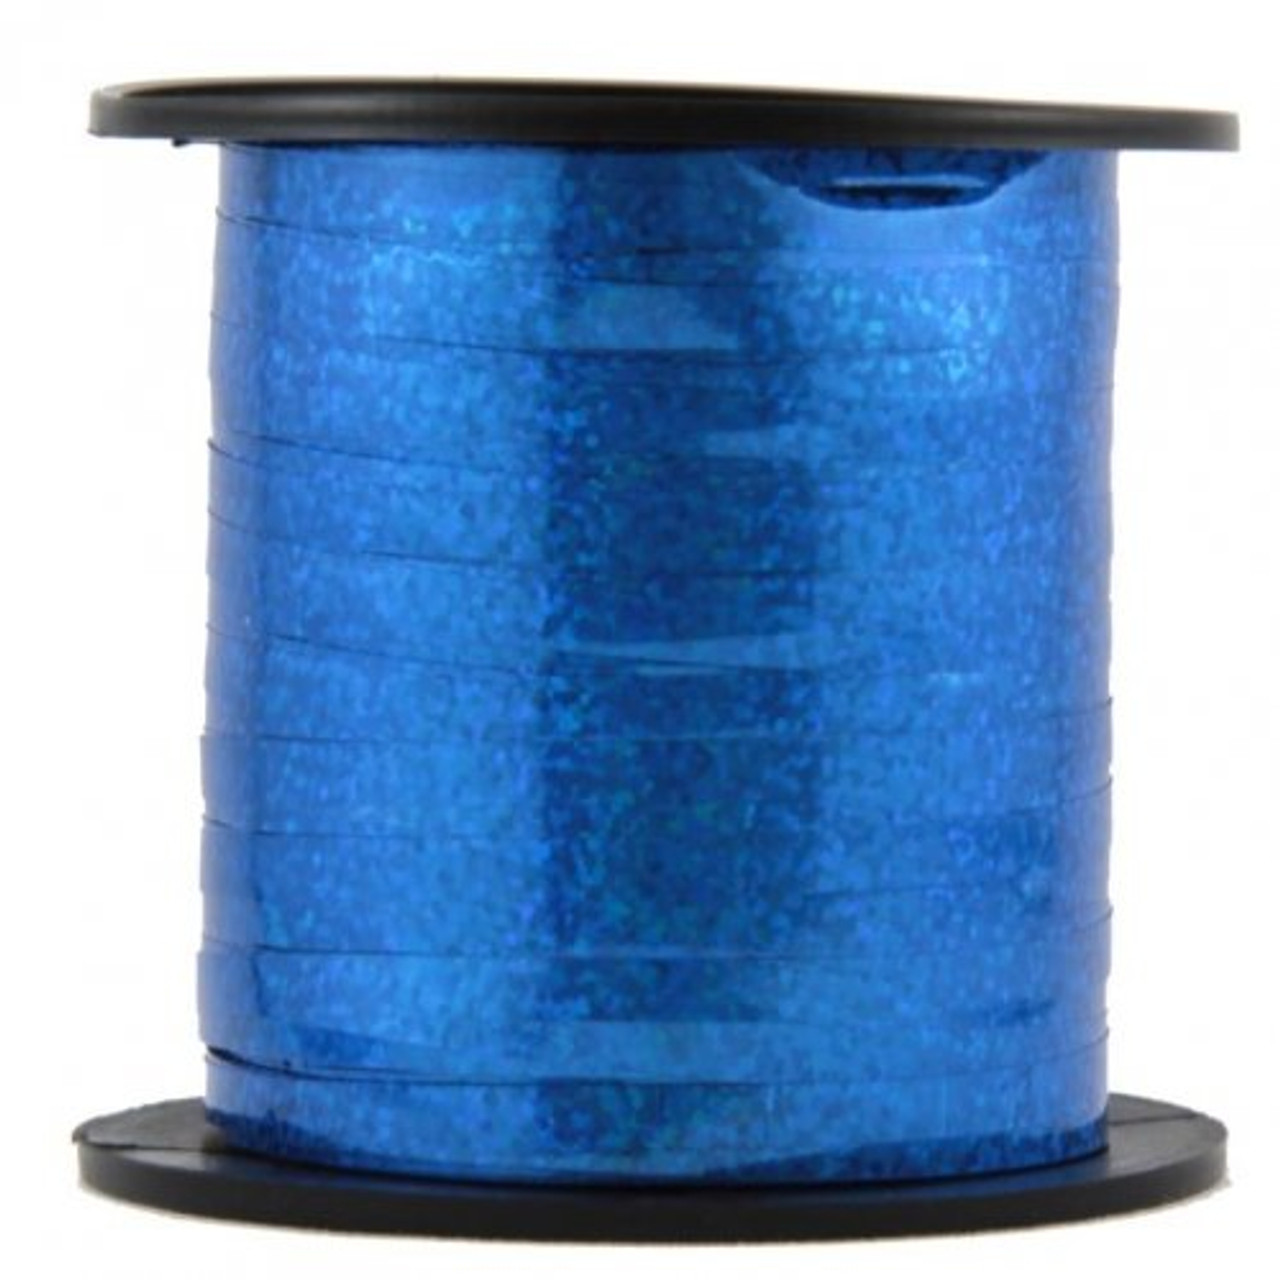 HOLOGRAPHIC BLUE CURLING RIBBON 225m Code 205247